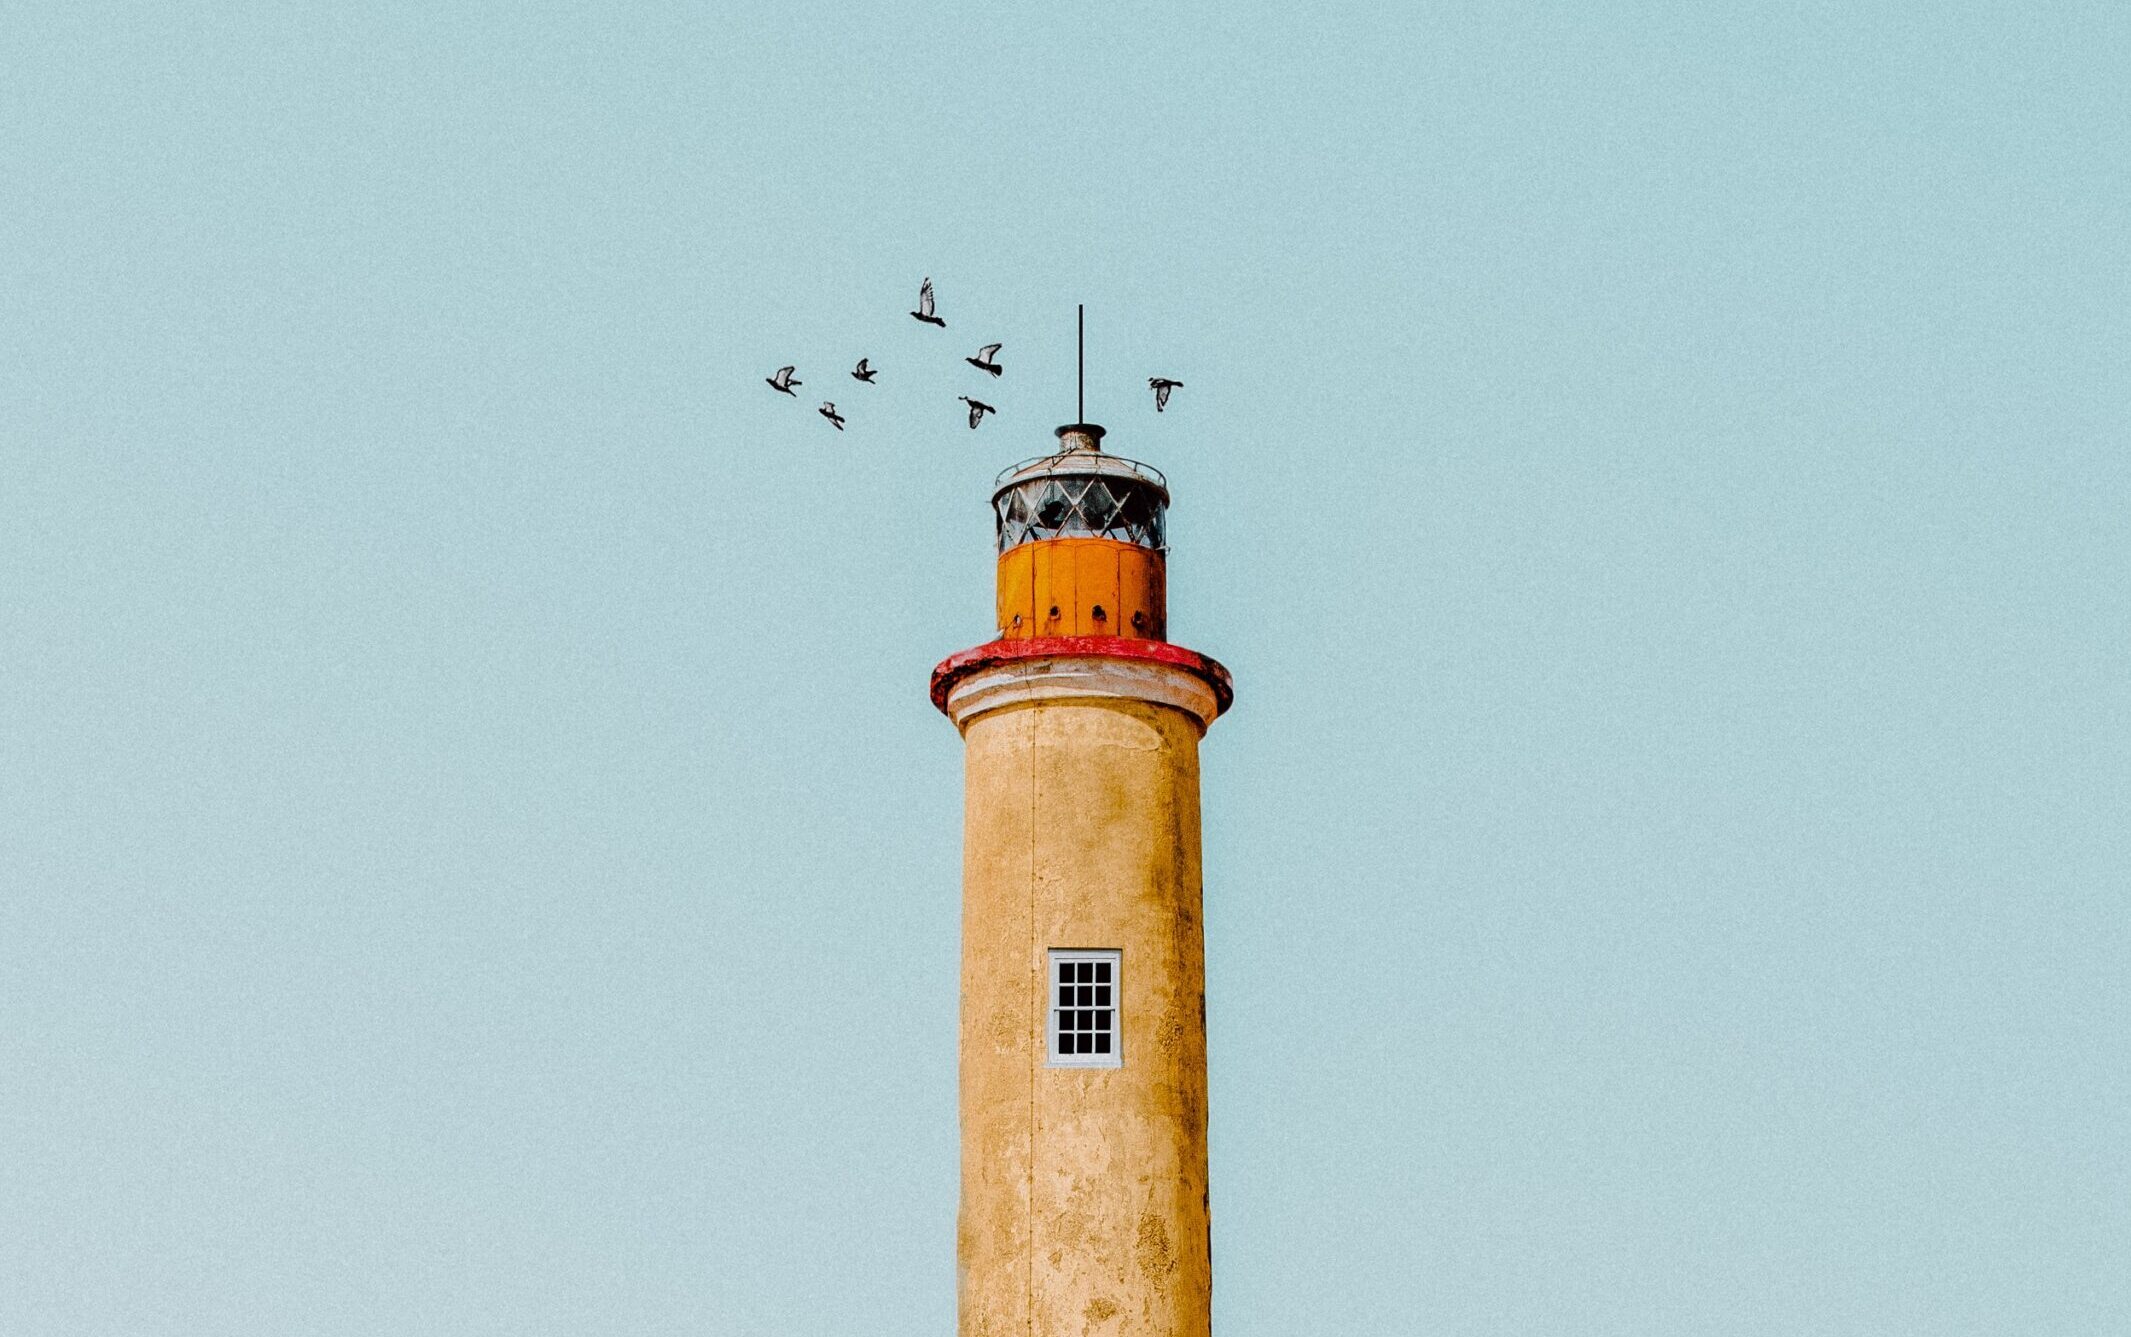 A lighthouse against blue sky, with some birds circling near the top of the tower.